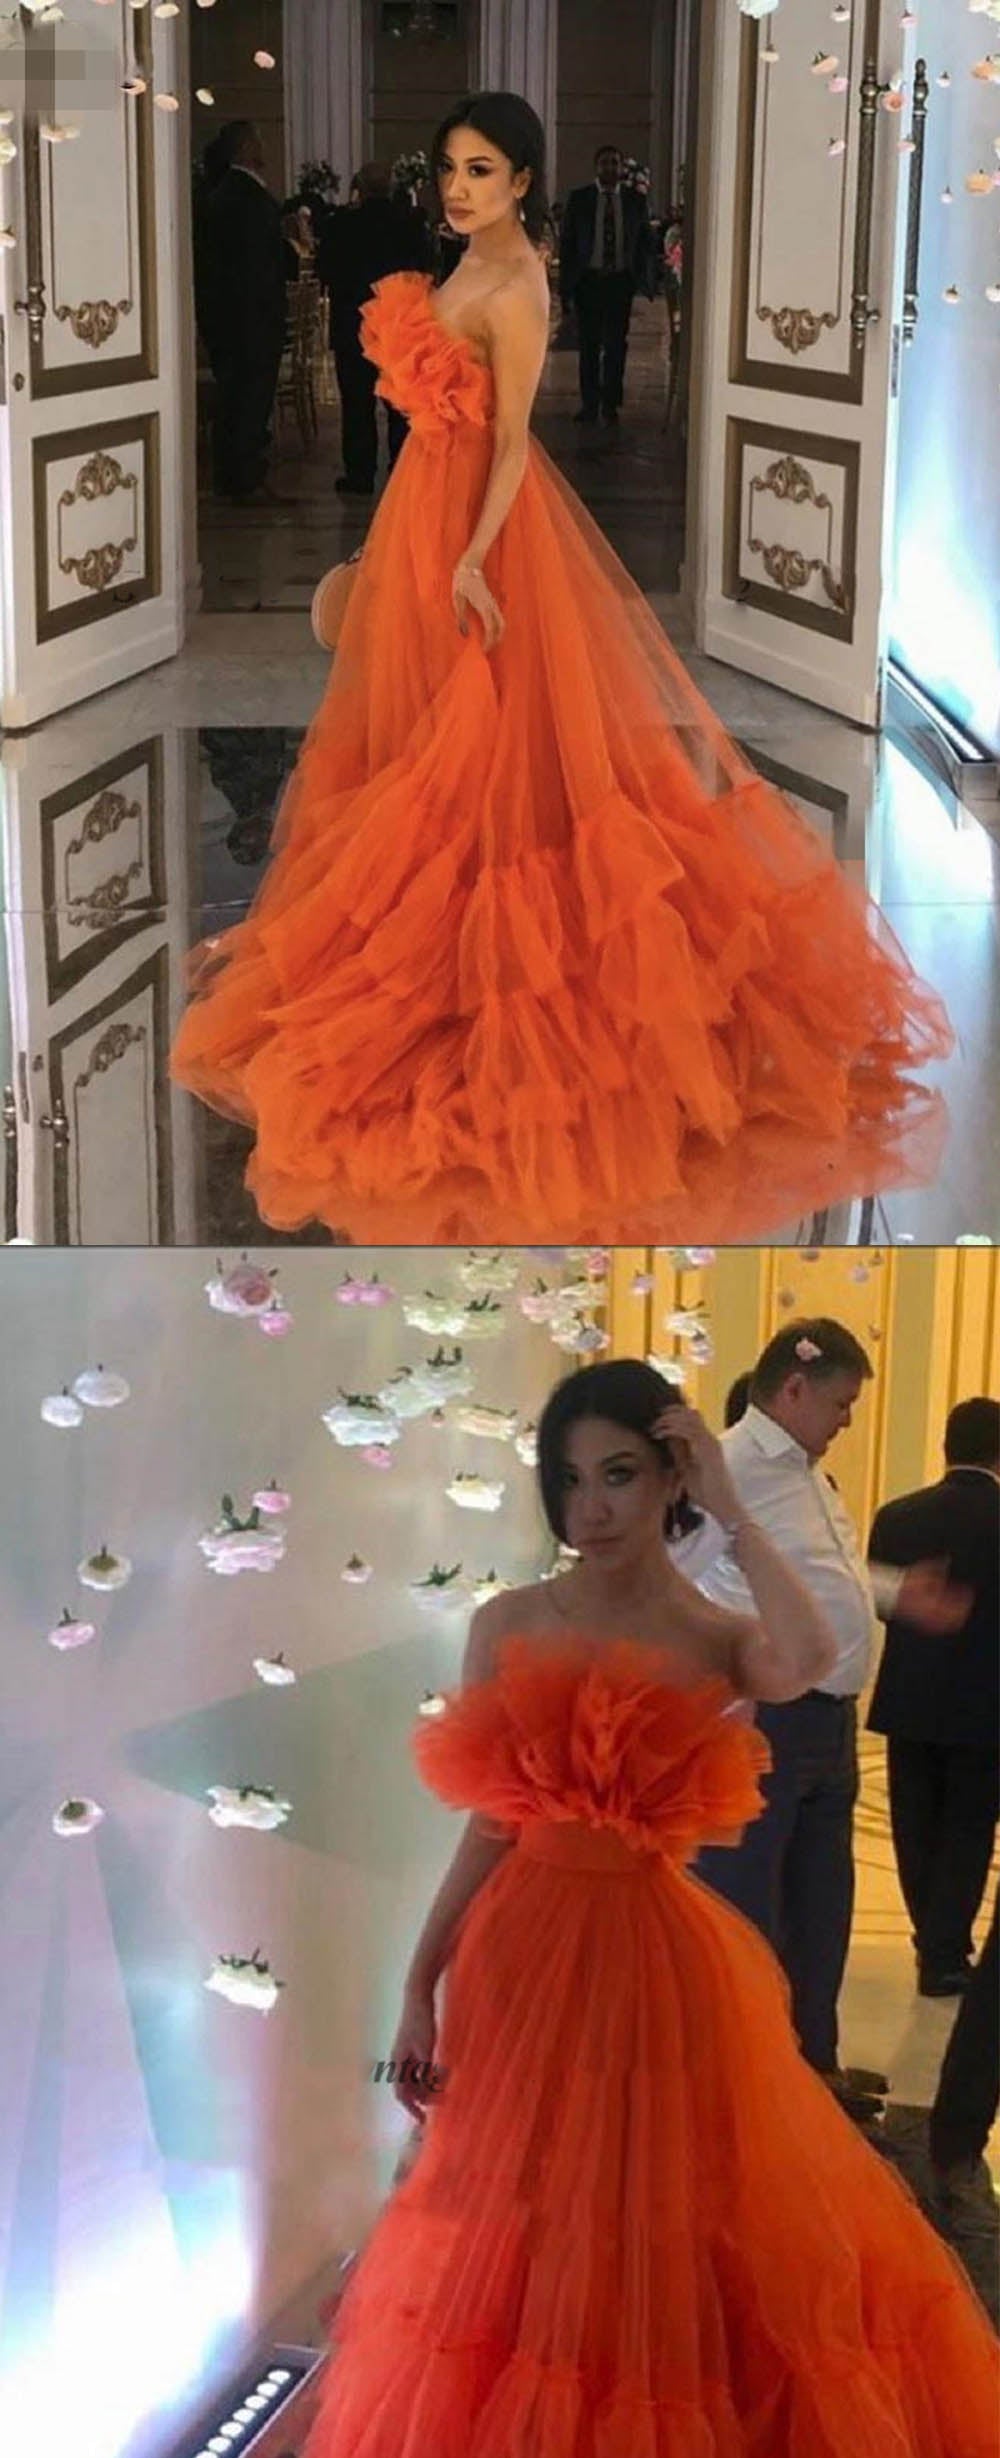 Ruffles Tulle Strapless Tiered  Orange Prom Dresses A Line Special Occasion Gowns PL10624